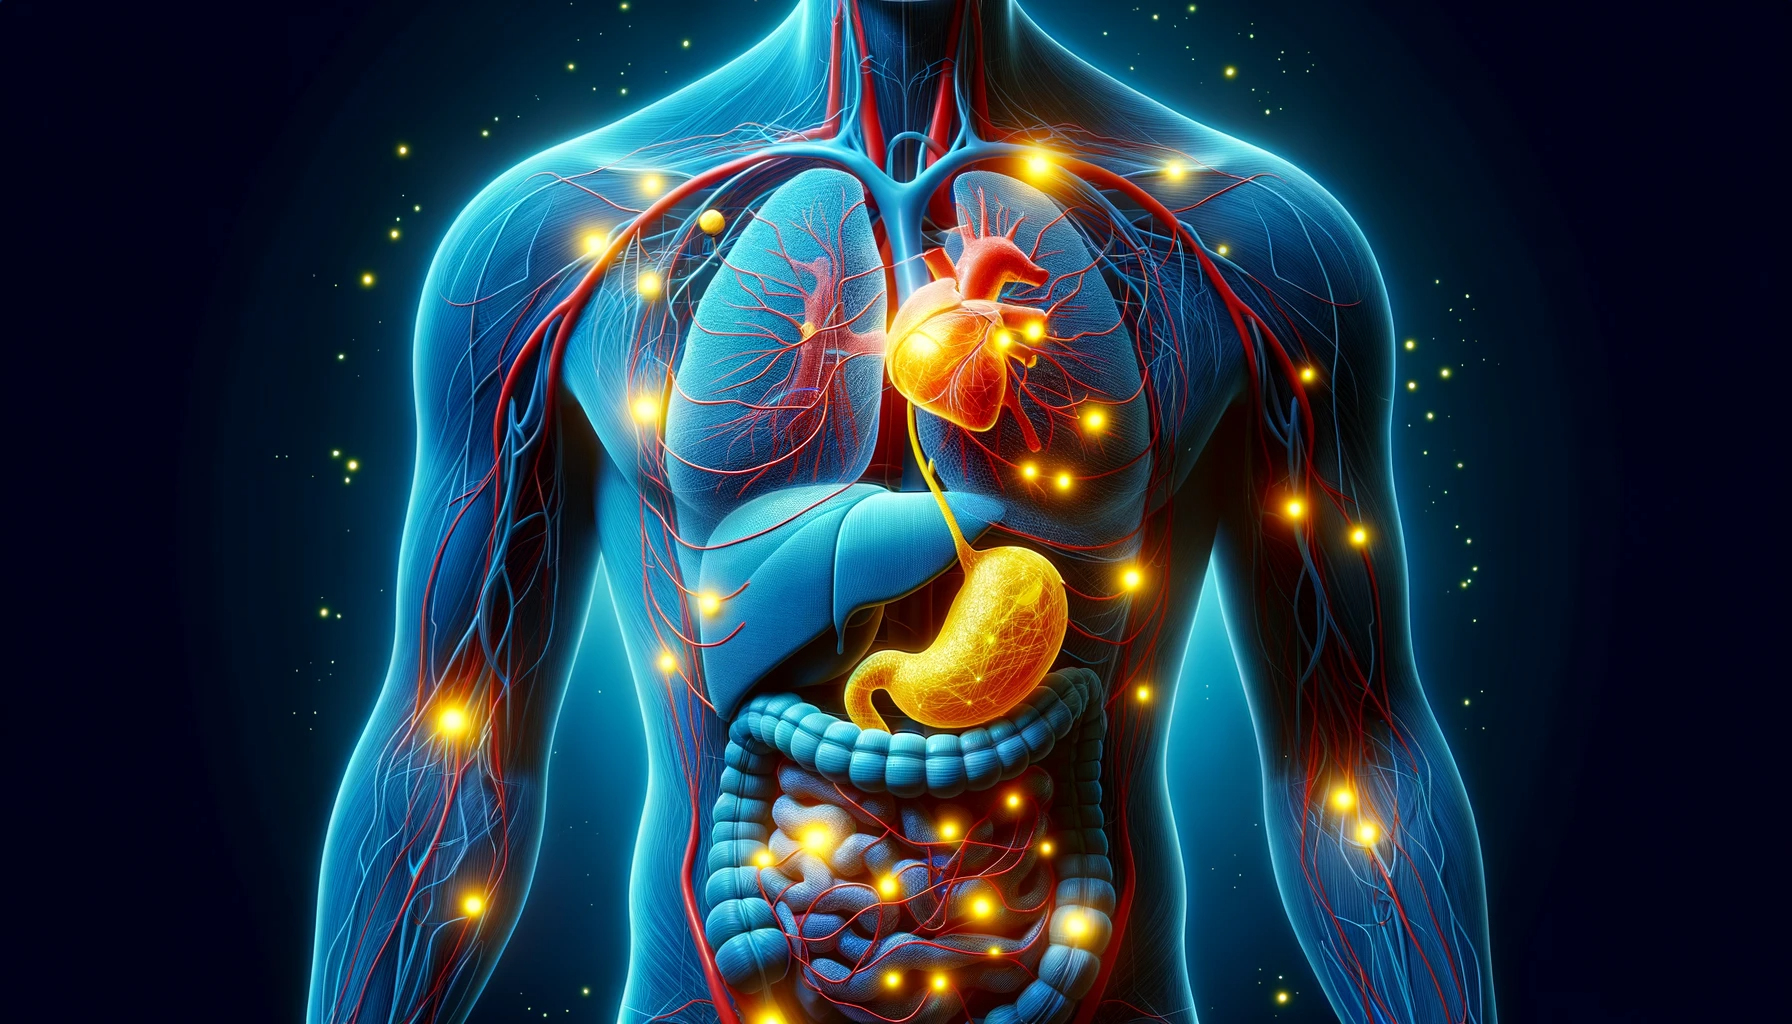 What Happens to the Body When we Diet? Image Credit: Created with the assistance of DALL·E 3